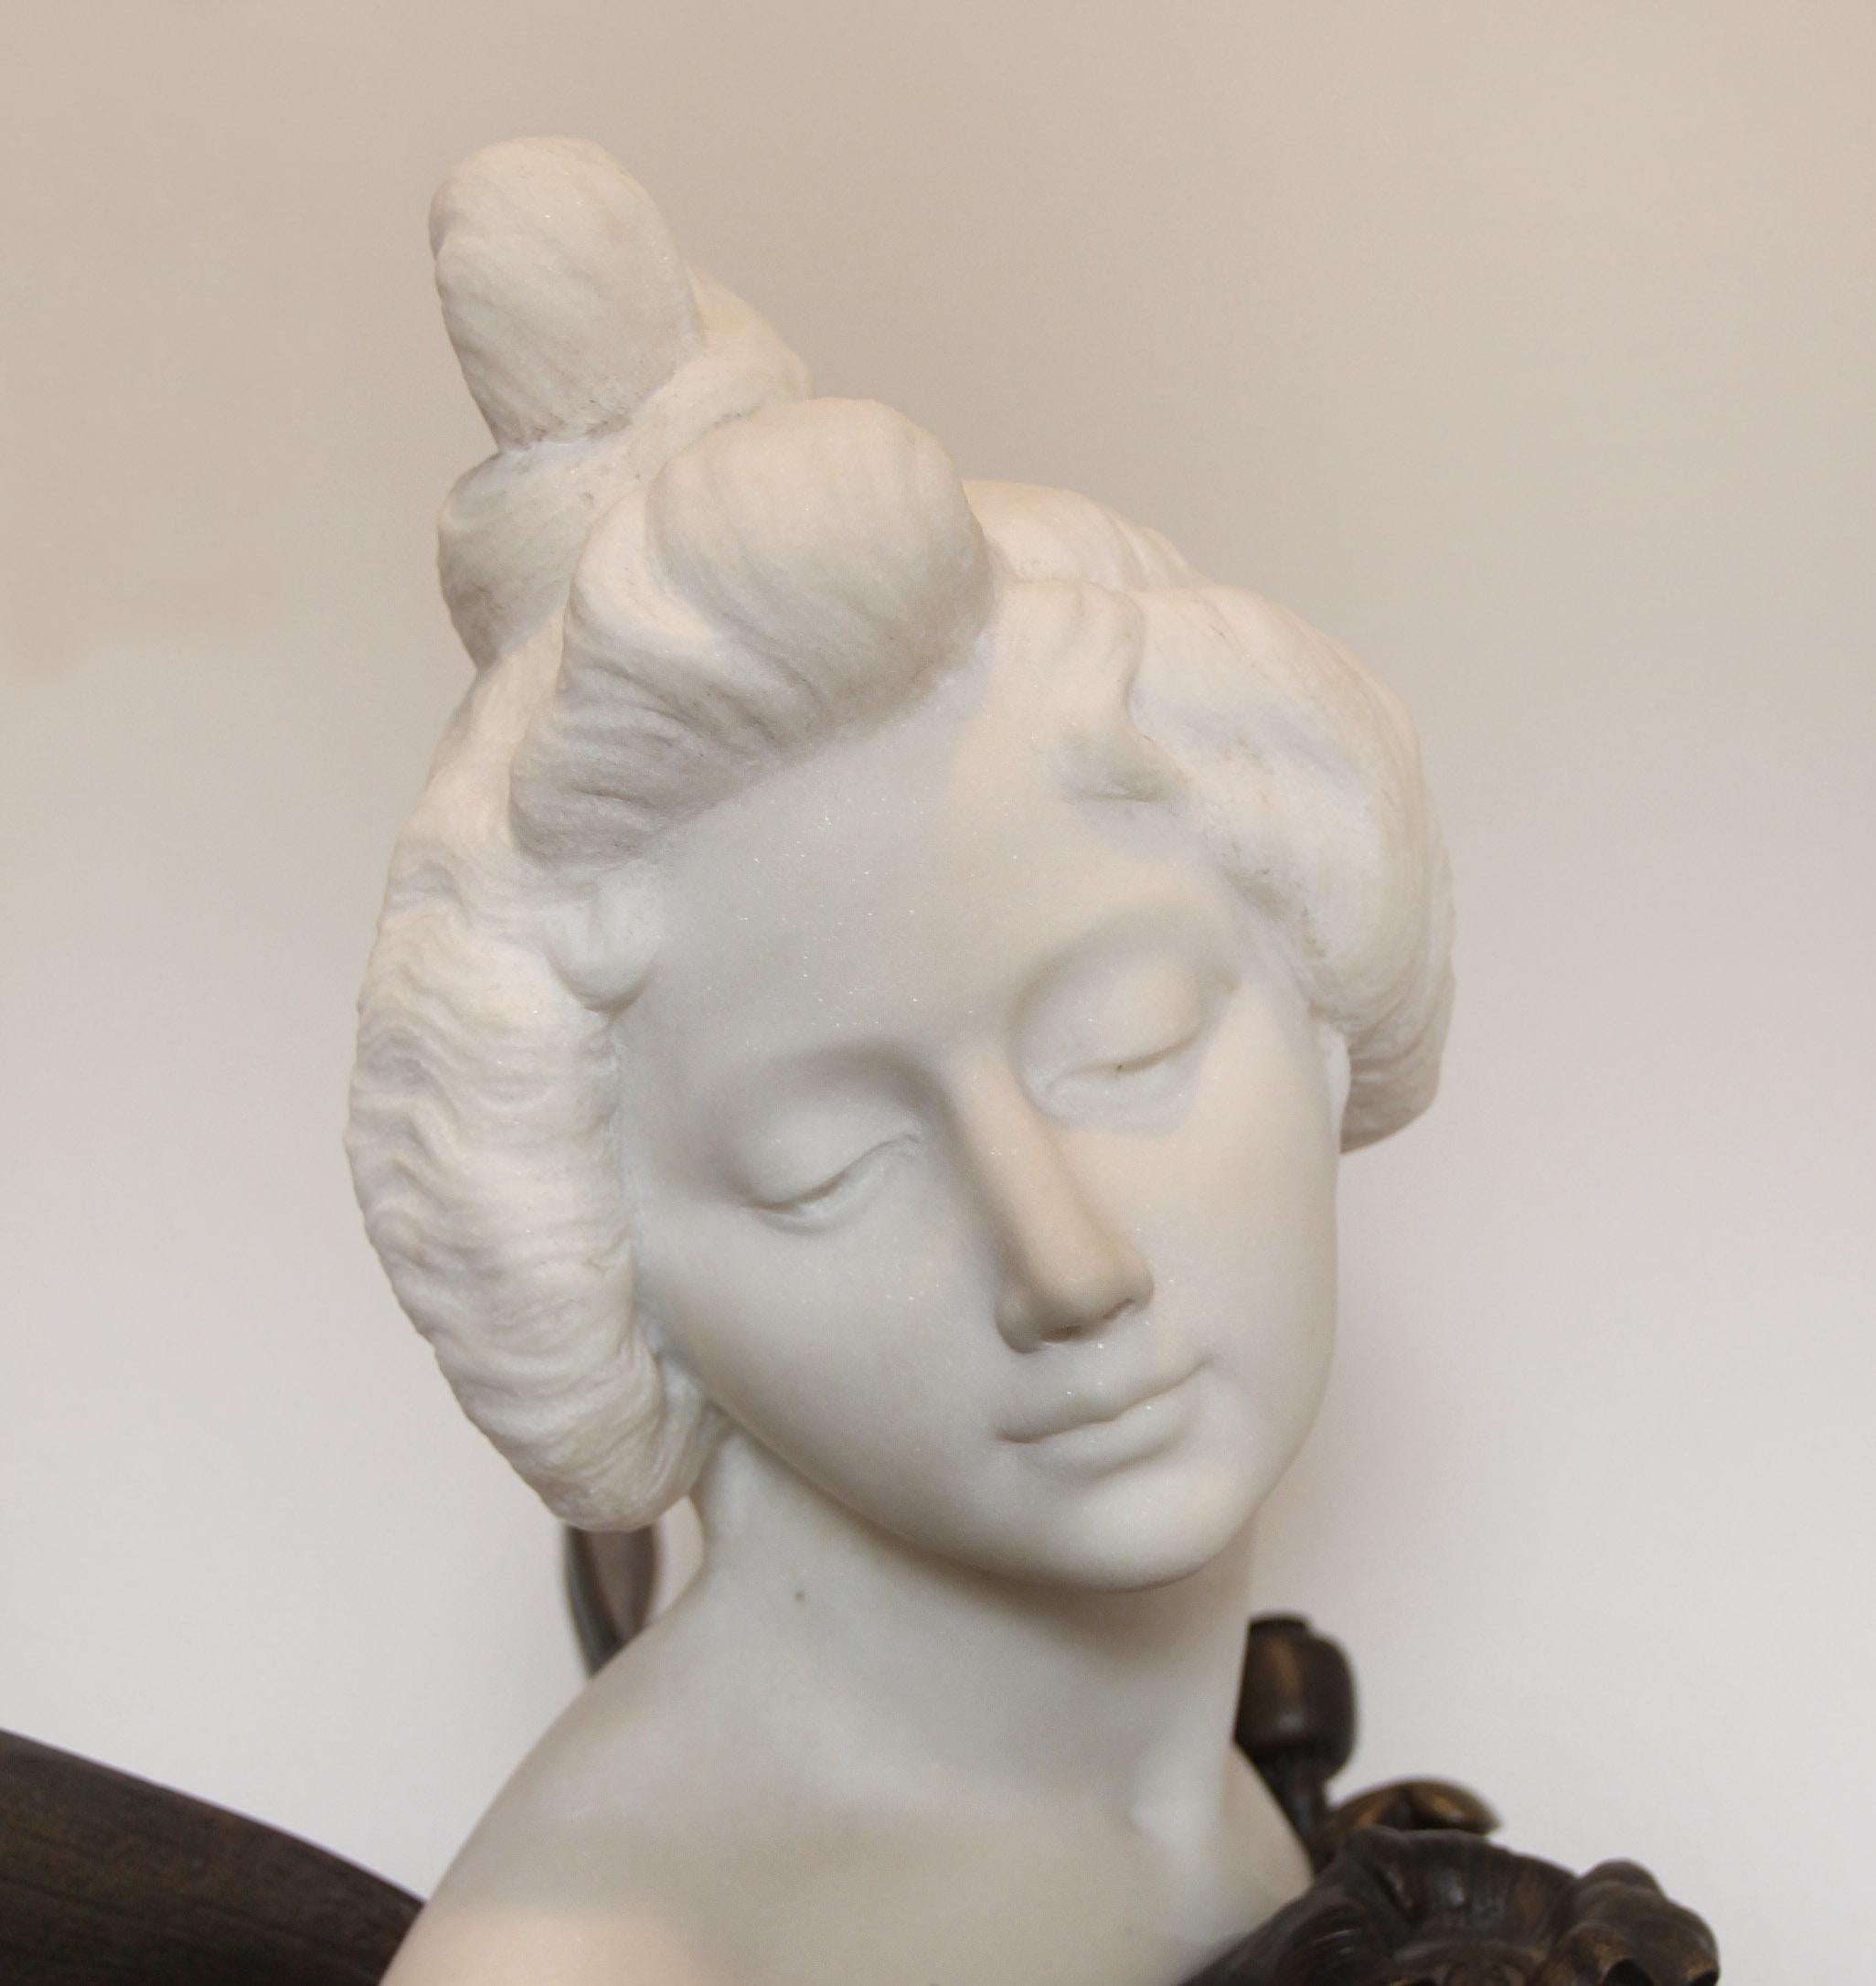 A stunning late 19th century Carrara marble and bronze bust entitled “Papillon De Nuit” by Joaquim Anglès

Depicting a beautiful woman with butterfly wings surrounded by flowers and foliage.

Inscribed Papillon De Nuit Par Anglès and signed